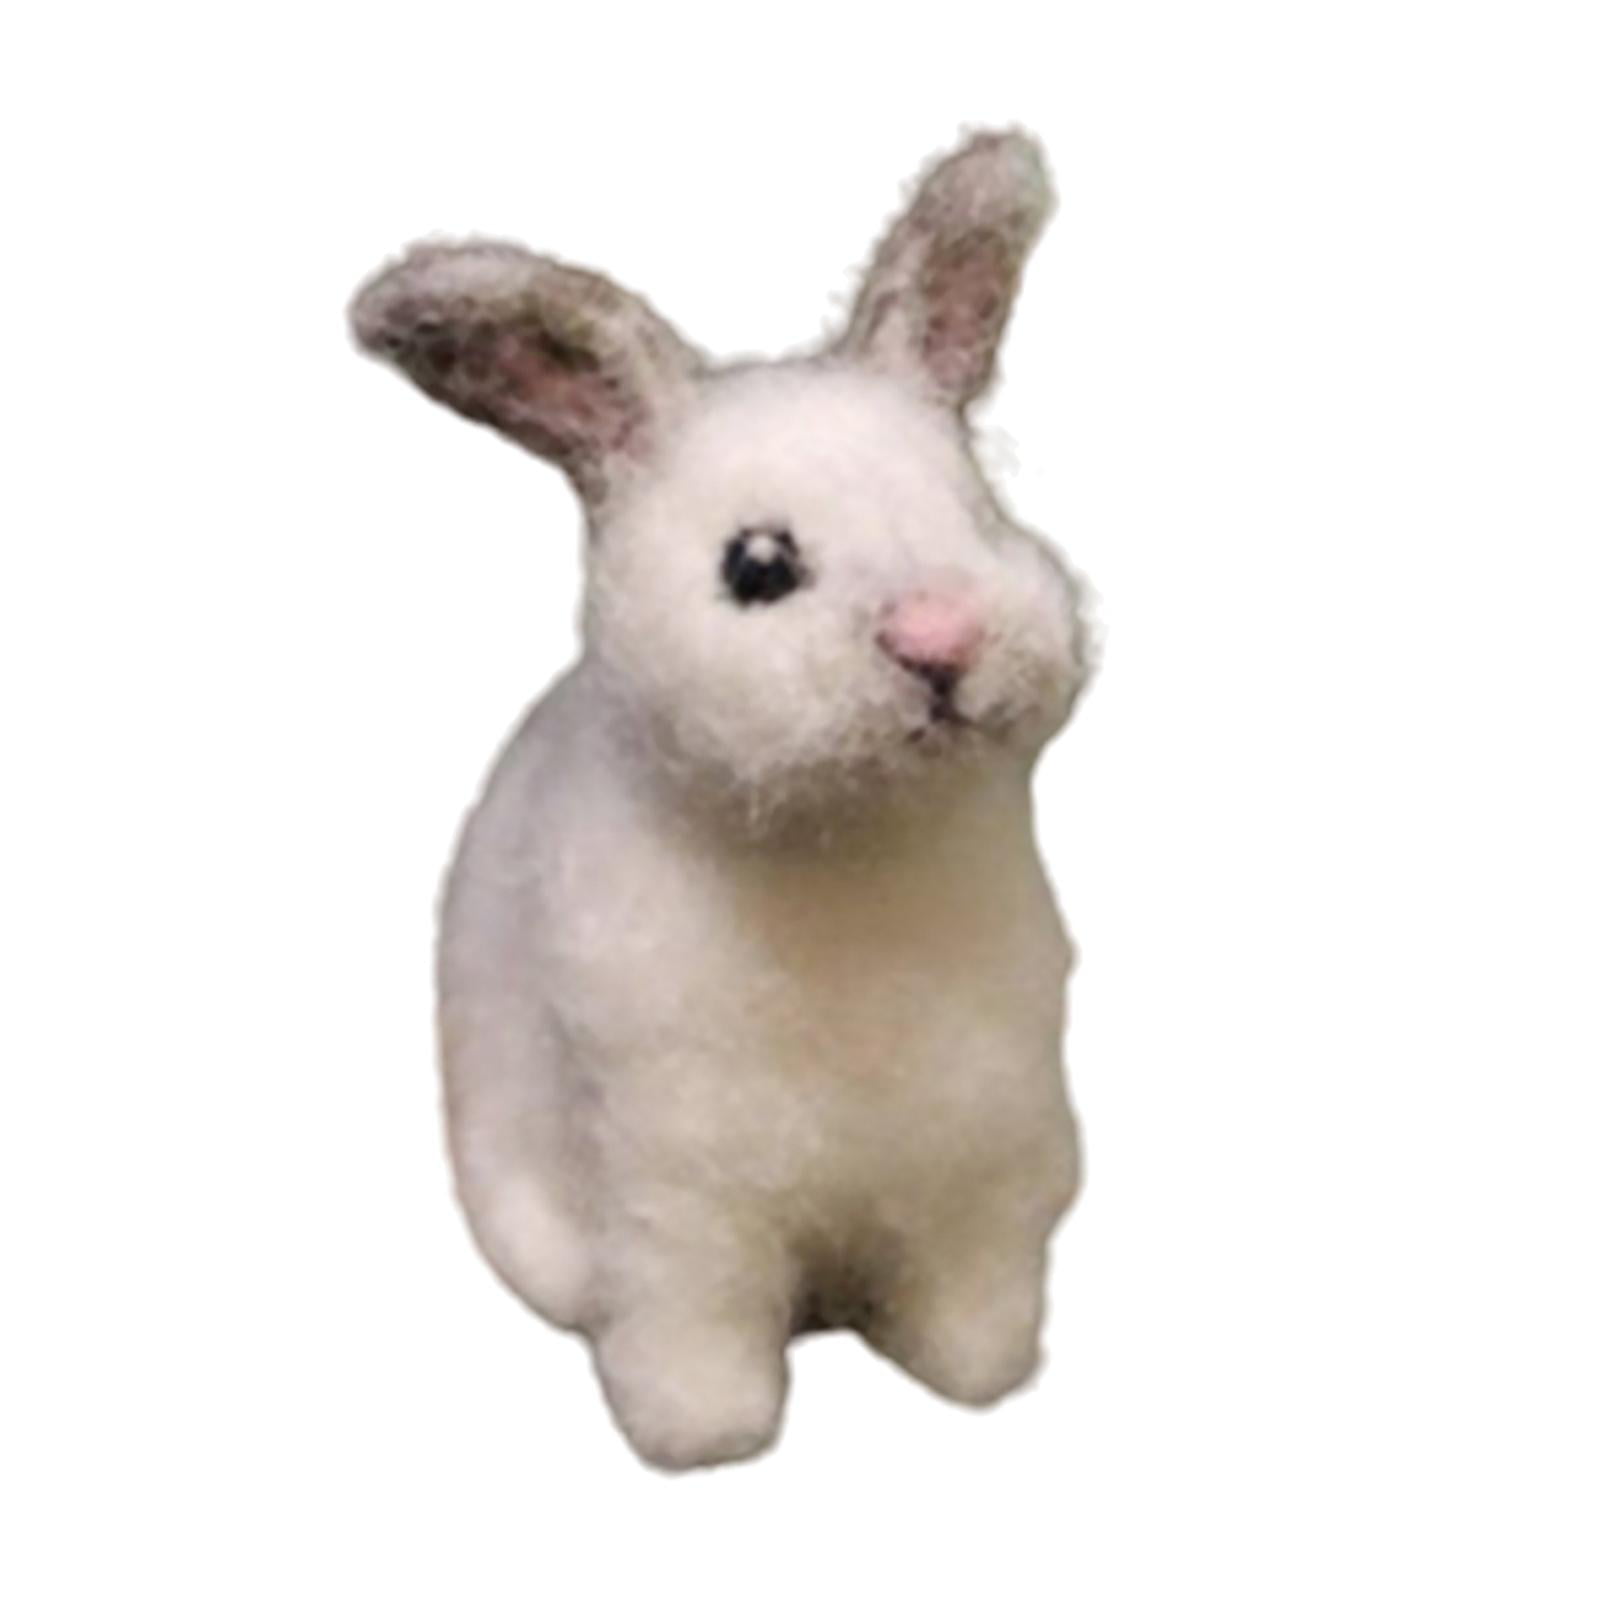 Felted bunny family-animal sculpture-new mom & baby-needle felted hare